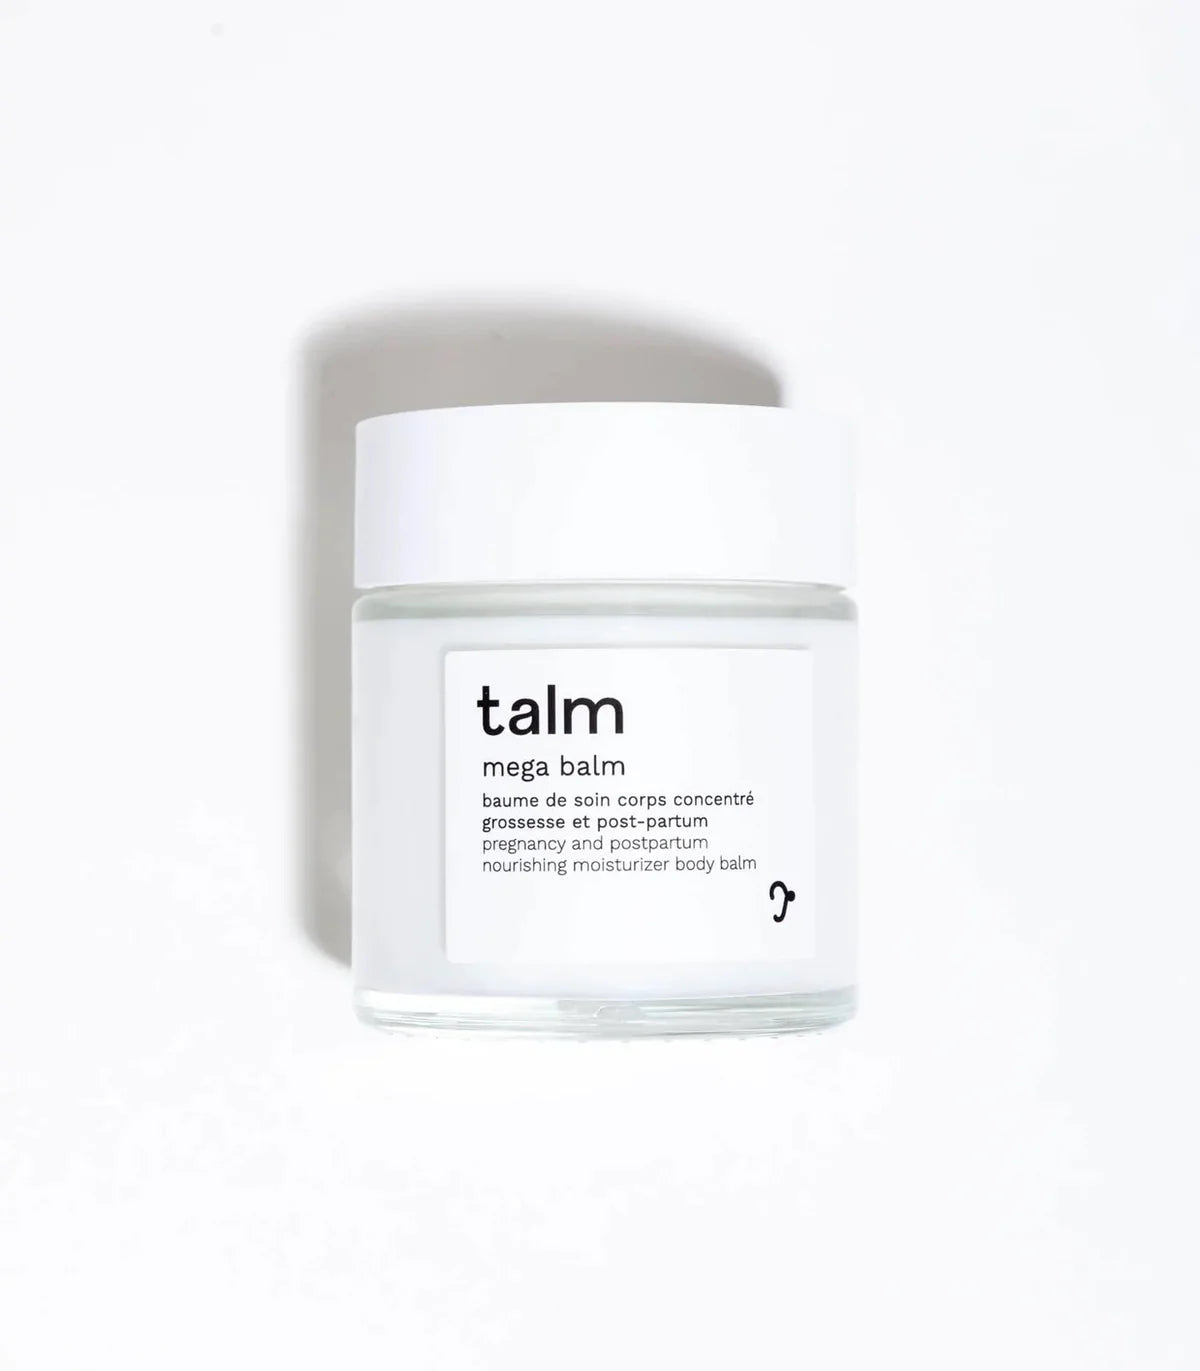 Talm - Concentrated body balm for pregnancy and postpartum (100ml)